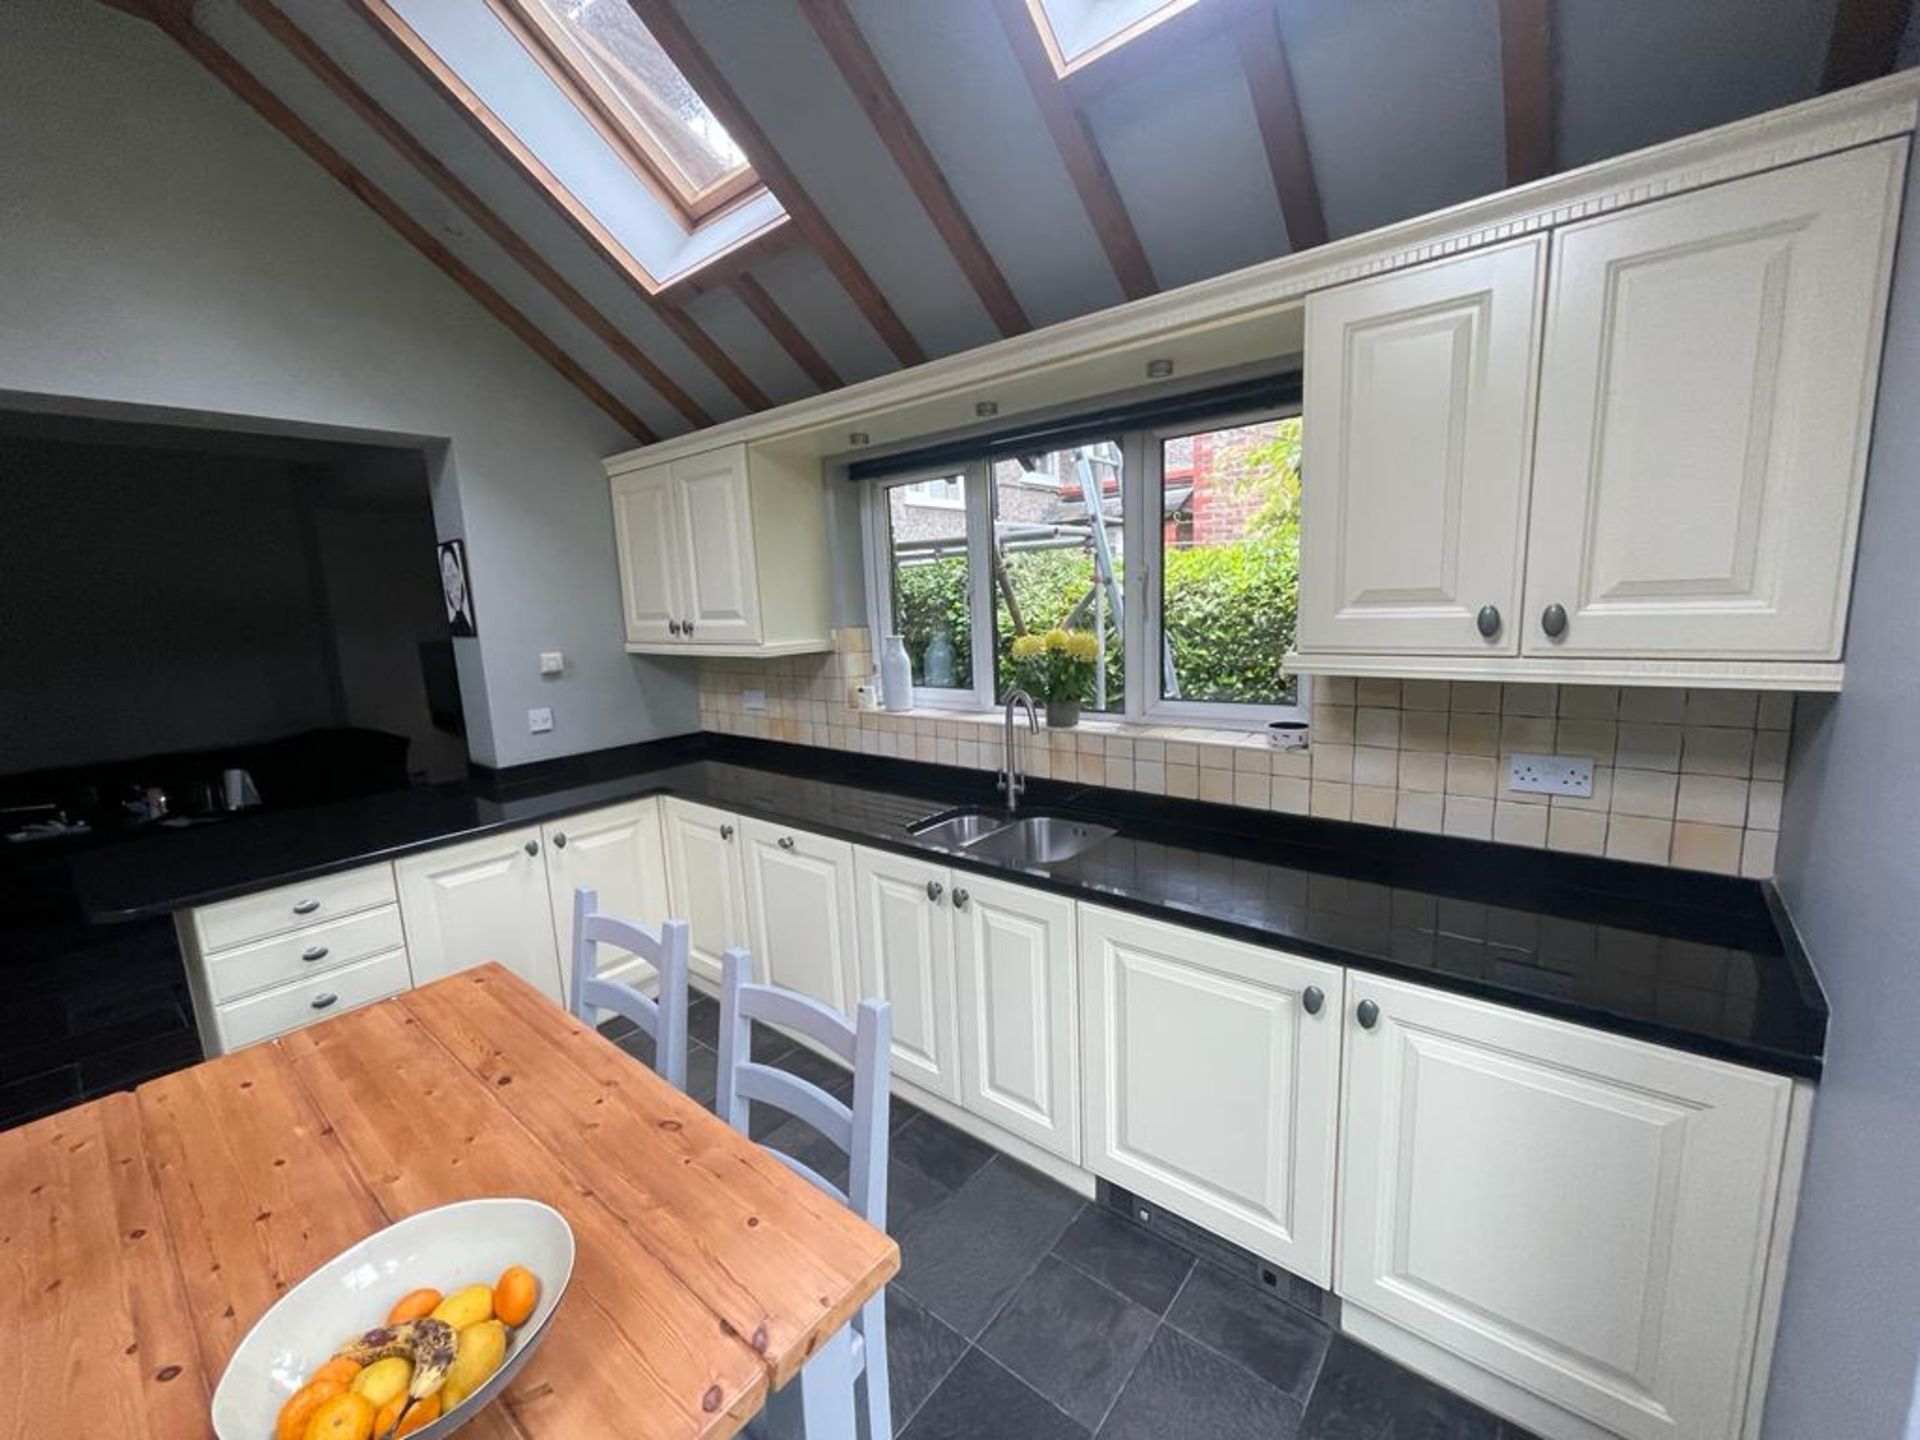 1 x Bespoke Keller Kitchen With Branded Appliances - From An Exclusive Property - No VAT On The - Image 125 of 127